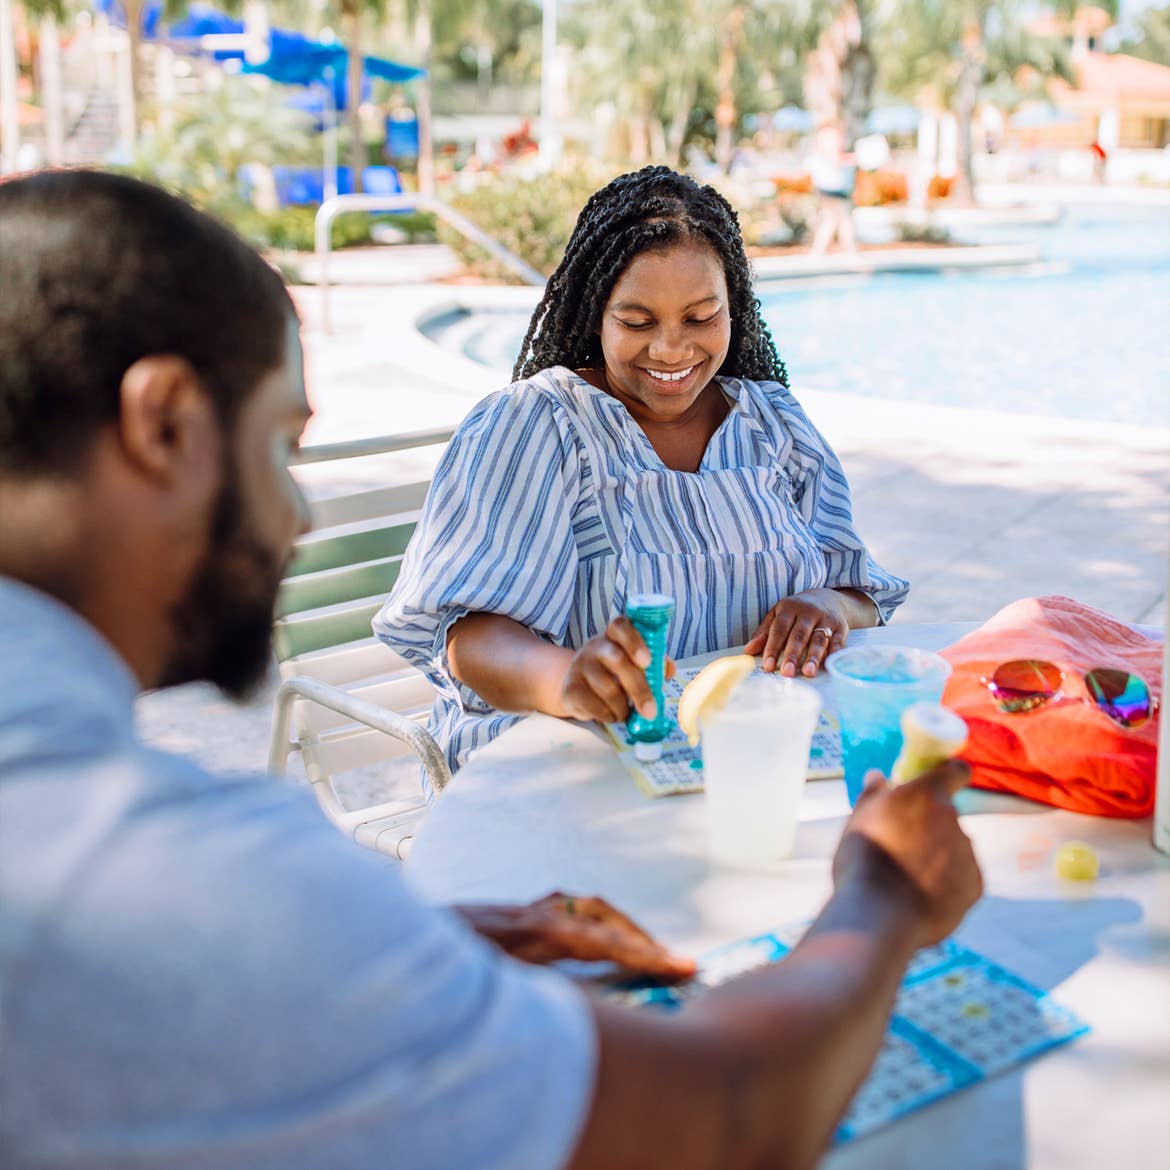 Krystin Godfrey (right) and her husband (left) enjoy a round of bingo poolside in River Island at our Orange Lake Resort located in Orlando, FL.